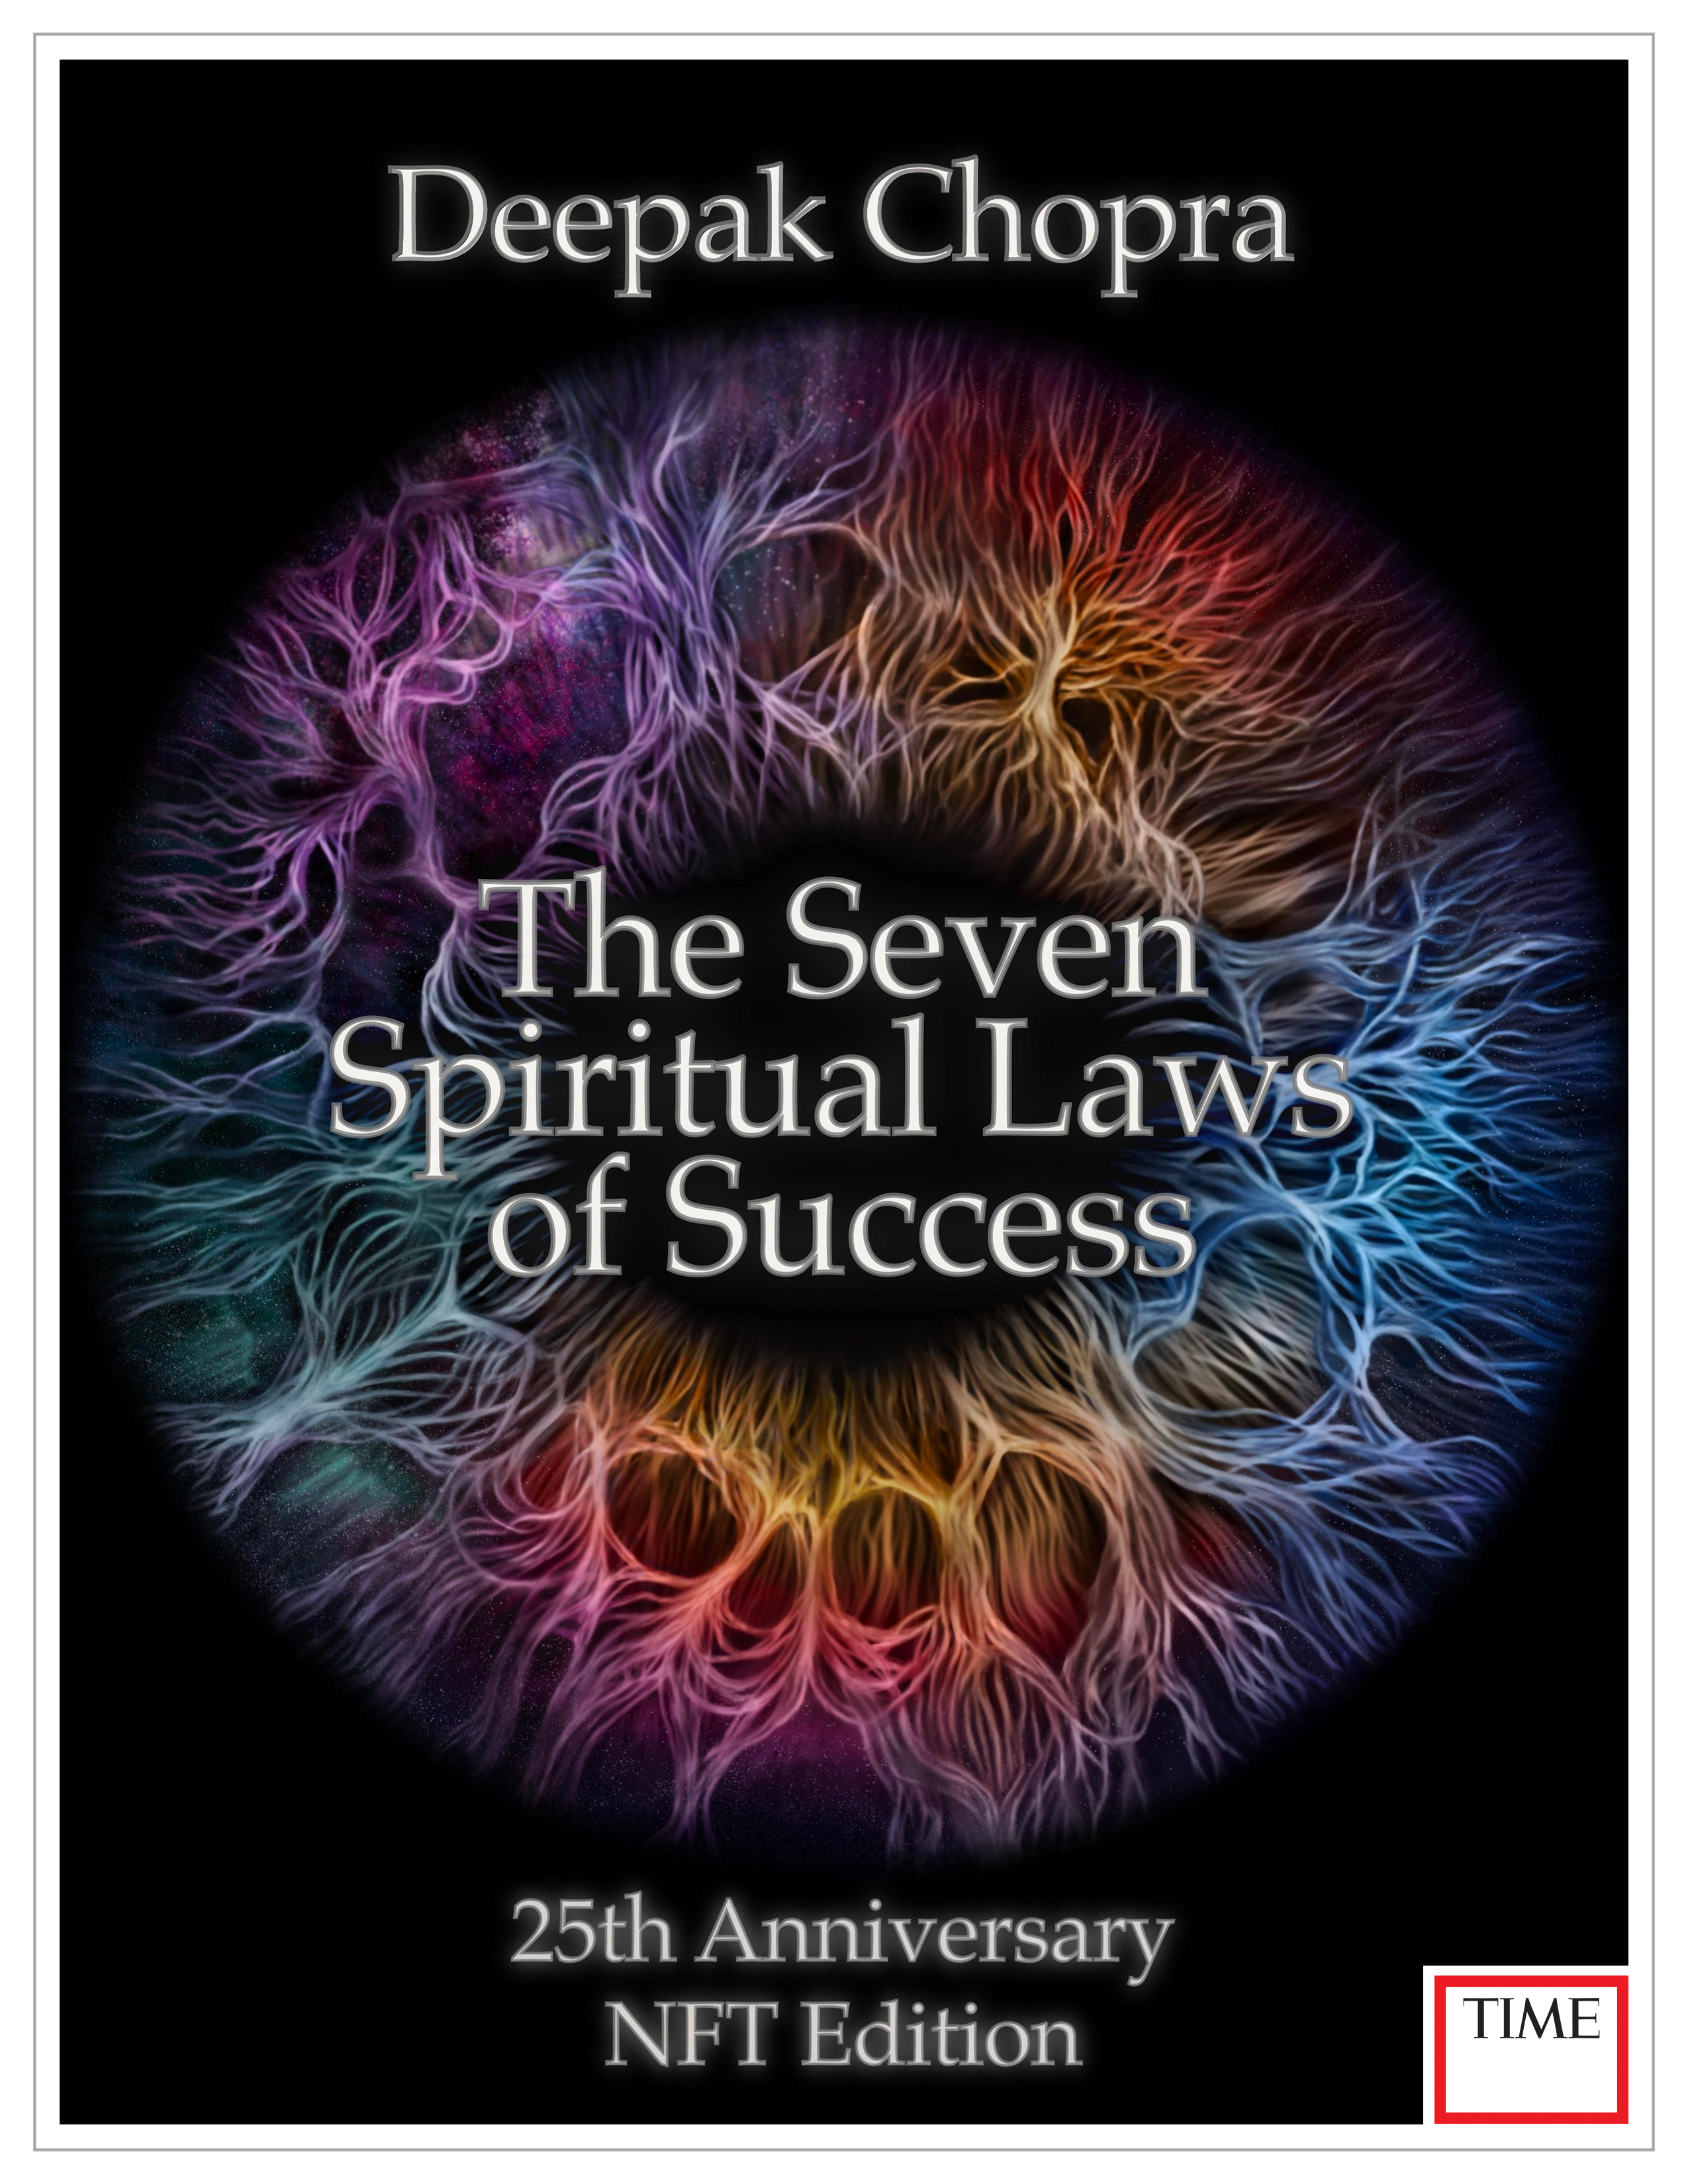 The Seven Spiritual Laws of Success | Cover by Krisandra Kneer